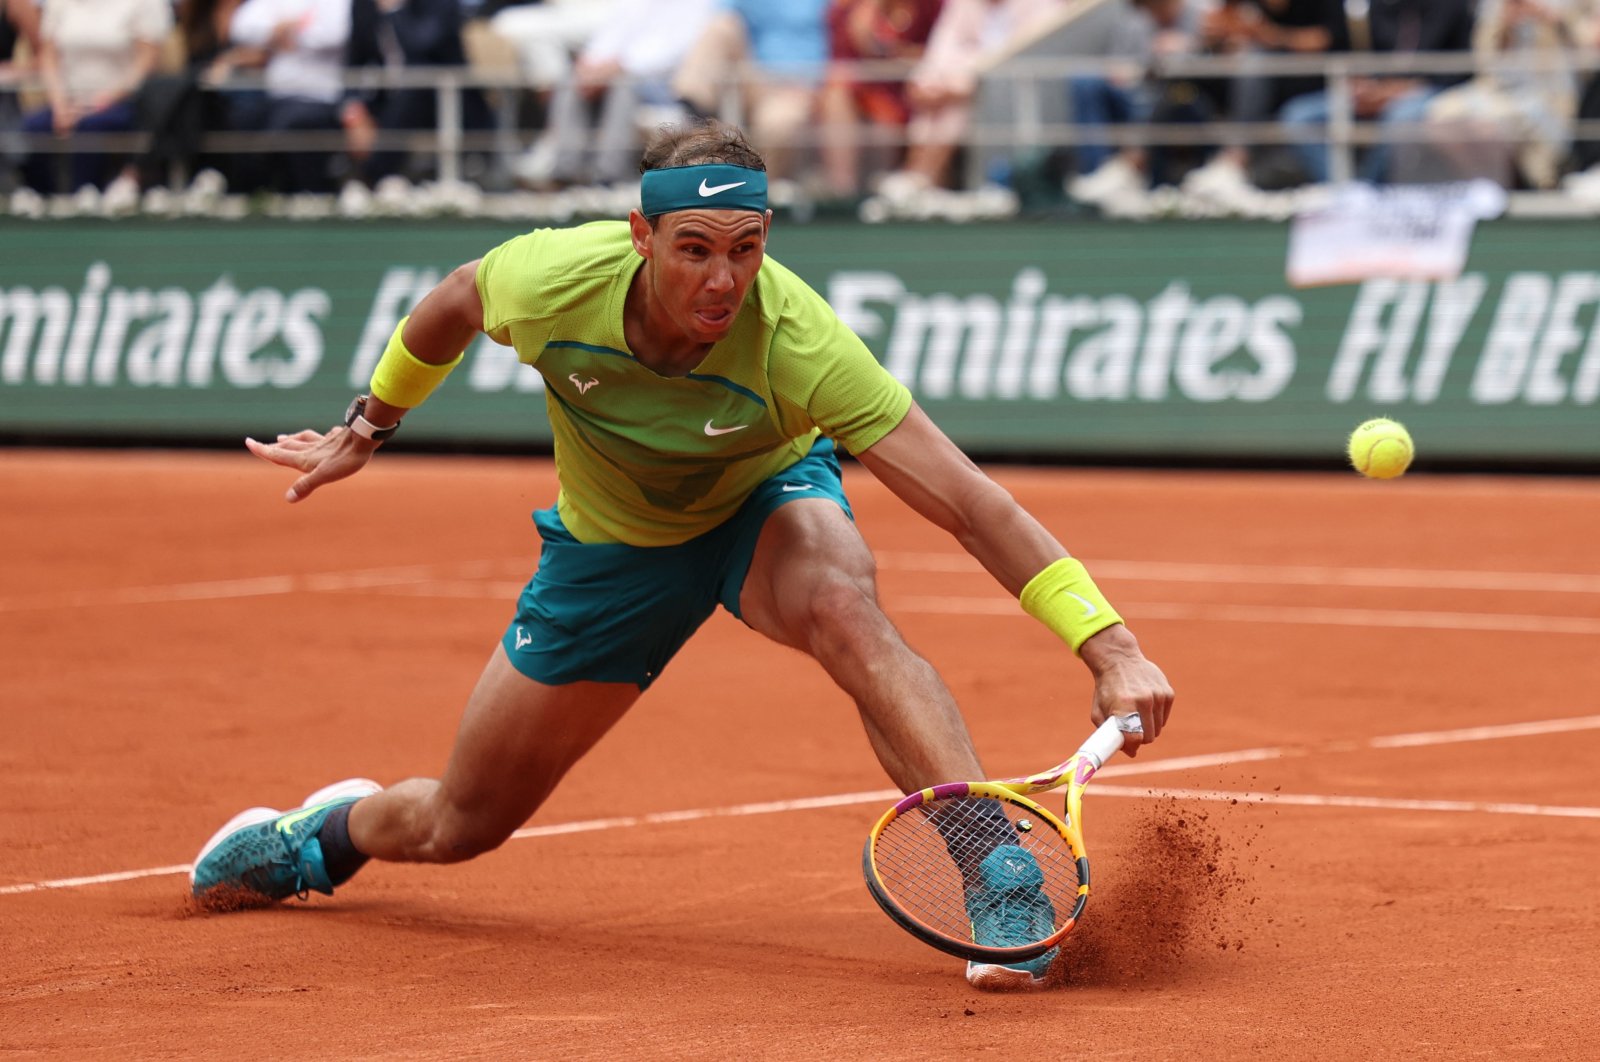 Spain&#039;s Rafael Nadal plays a forehand return to Norway&#039;s Casper Ruud during their men&#039;s singles final match on day fifteen of the Roland-Garros Open tennis tournament at the Court Philippe-Chatrier in Paris on June 5, 2022. (Photo by Thomas SAMSON / AFP)